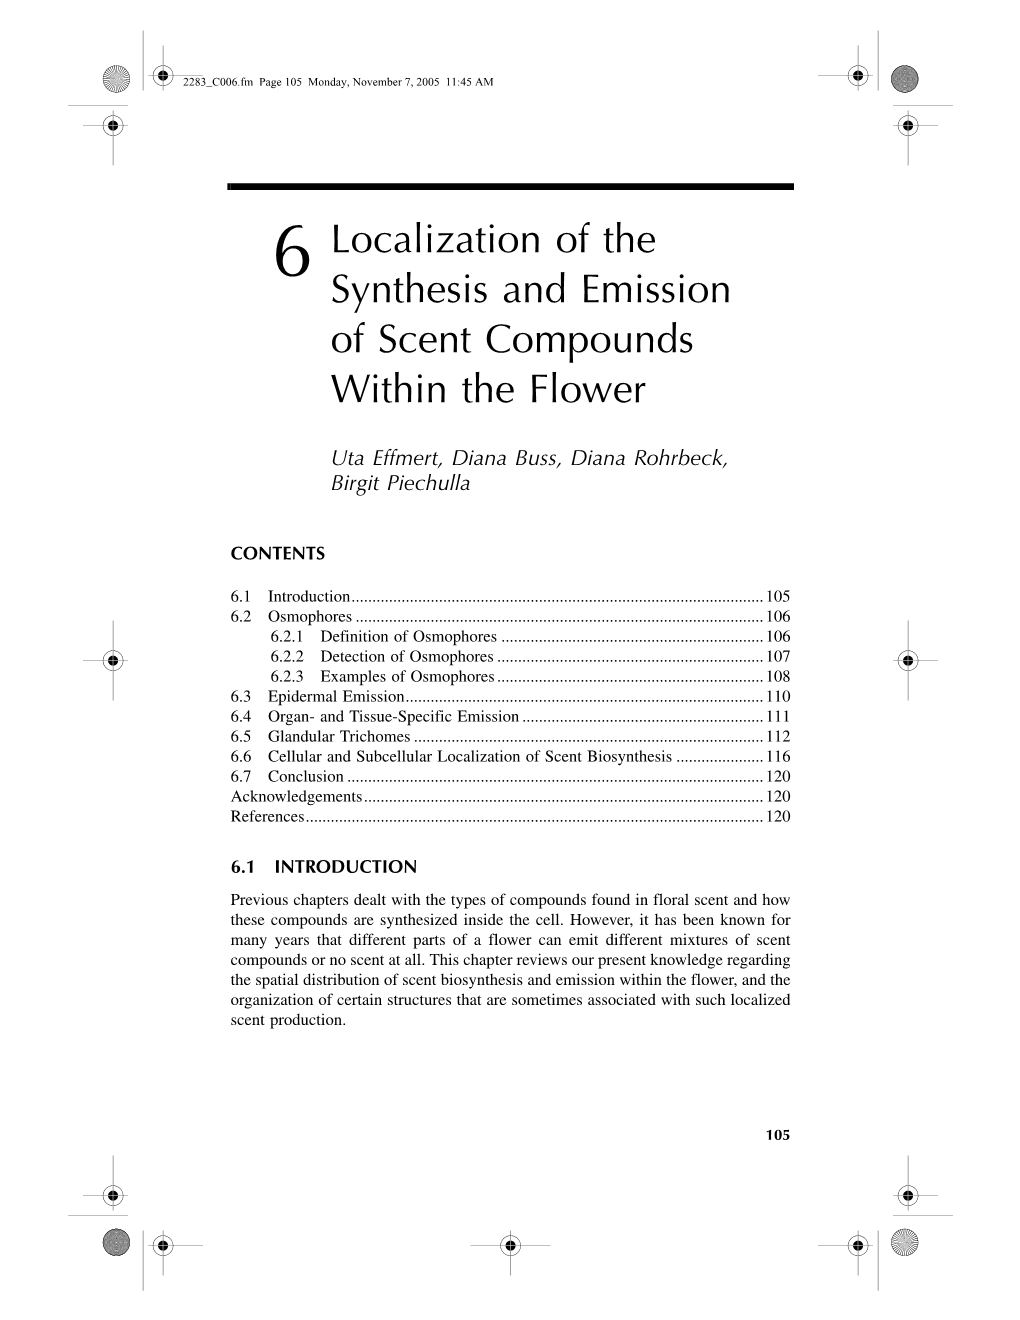 6 Localization of the Synthesis and Emission of Scent Compounds